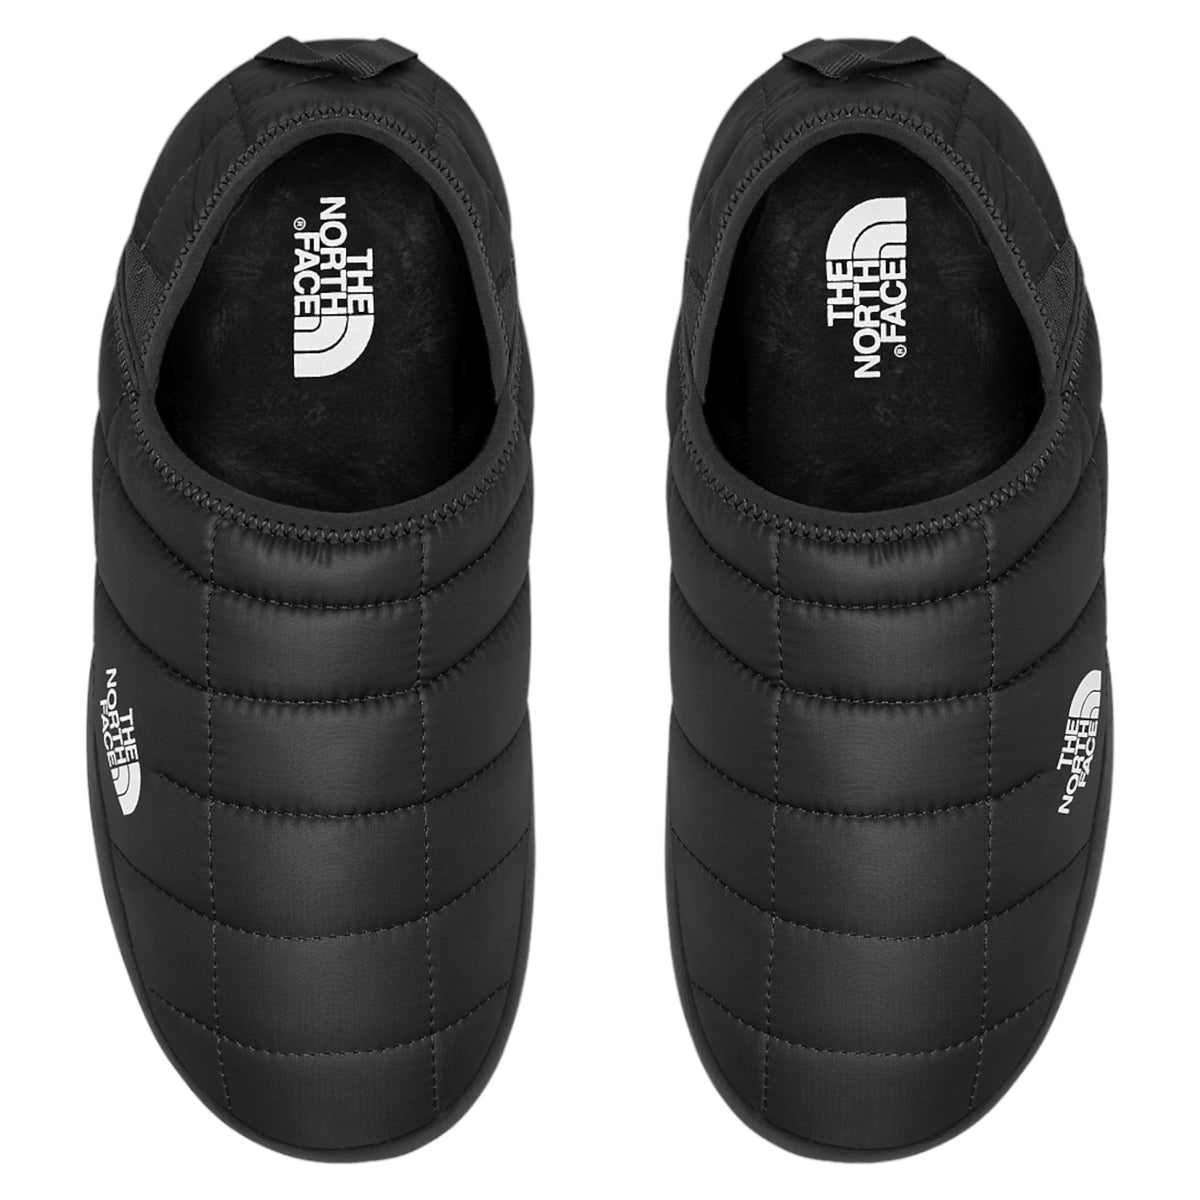 Thermoball Traction Mule V Women Shoes